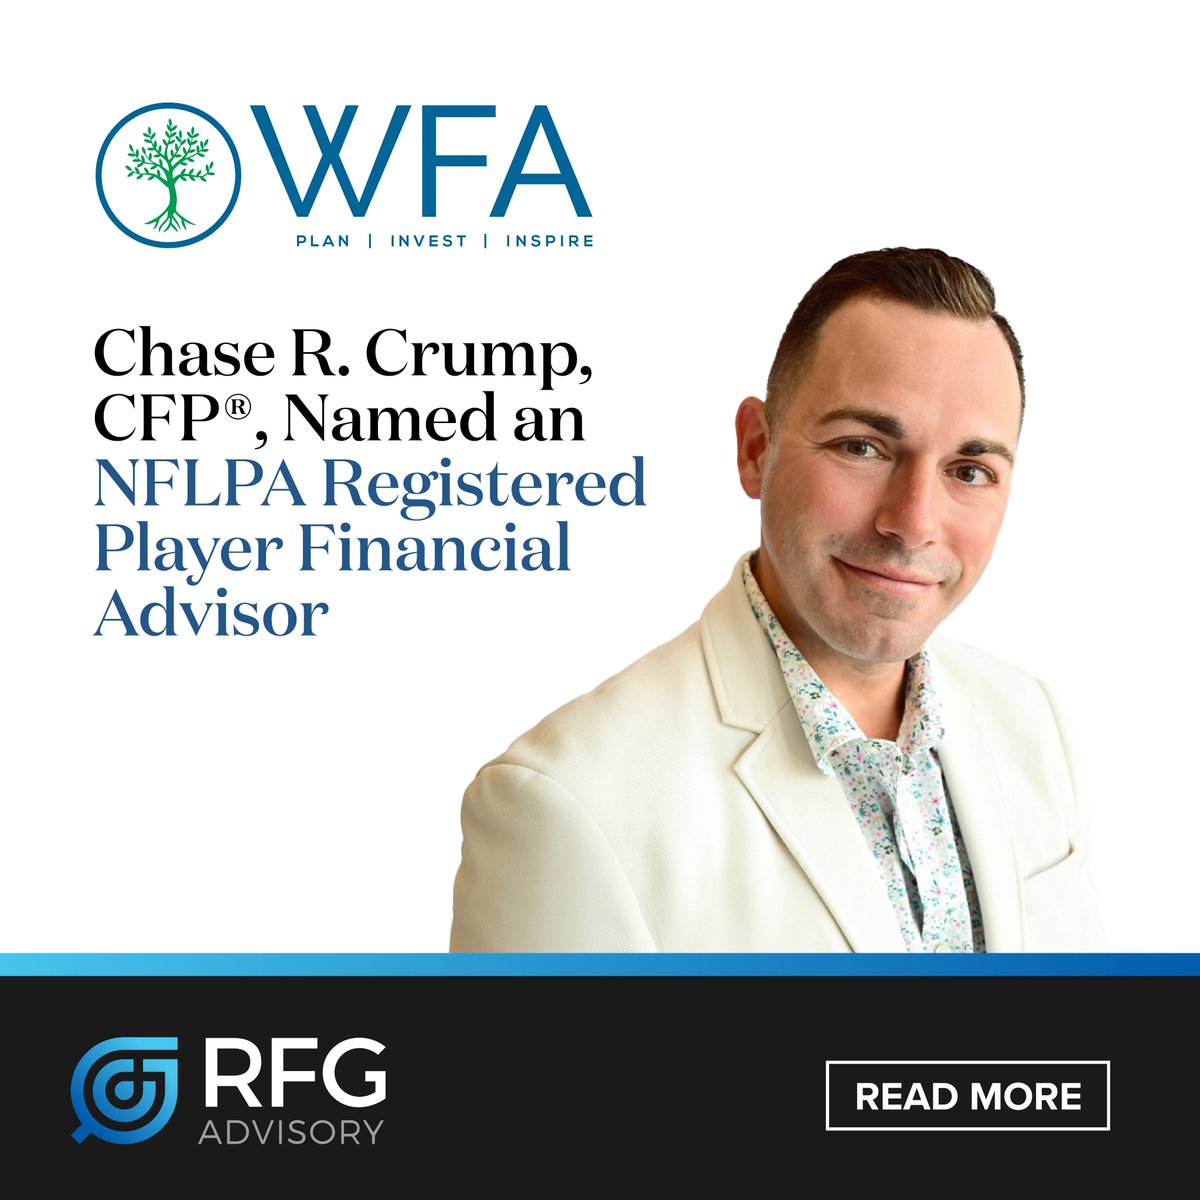 👏Congratulations to Chase R. Crump, CFP®, partner at WFA - Plan | Invest |Inspire who  is now a Registered Player Financial Advisor with the #NFLPA! This will allow Chase to expand on his passion of guiding athletes to secure their financial futures! 🏈 businesswire.com/news/home/2024…